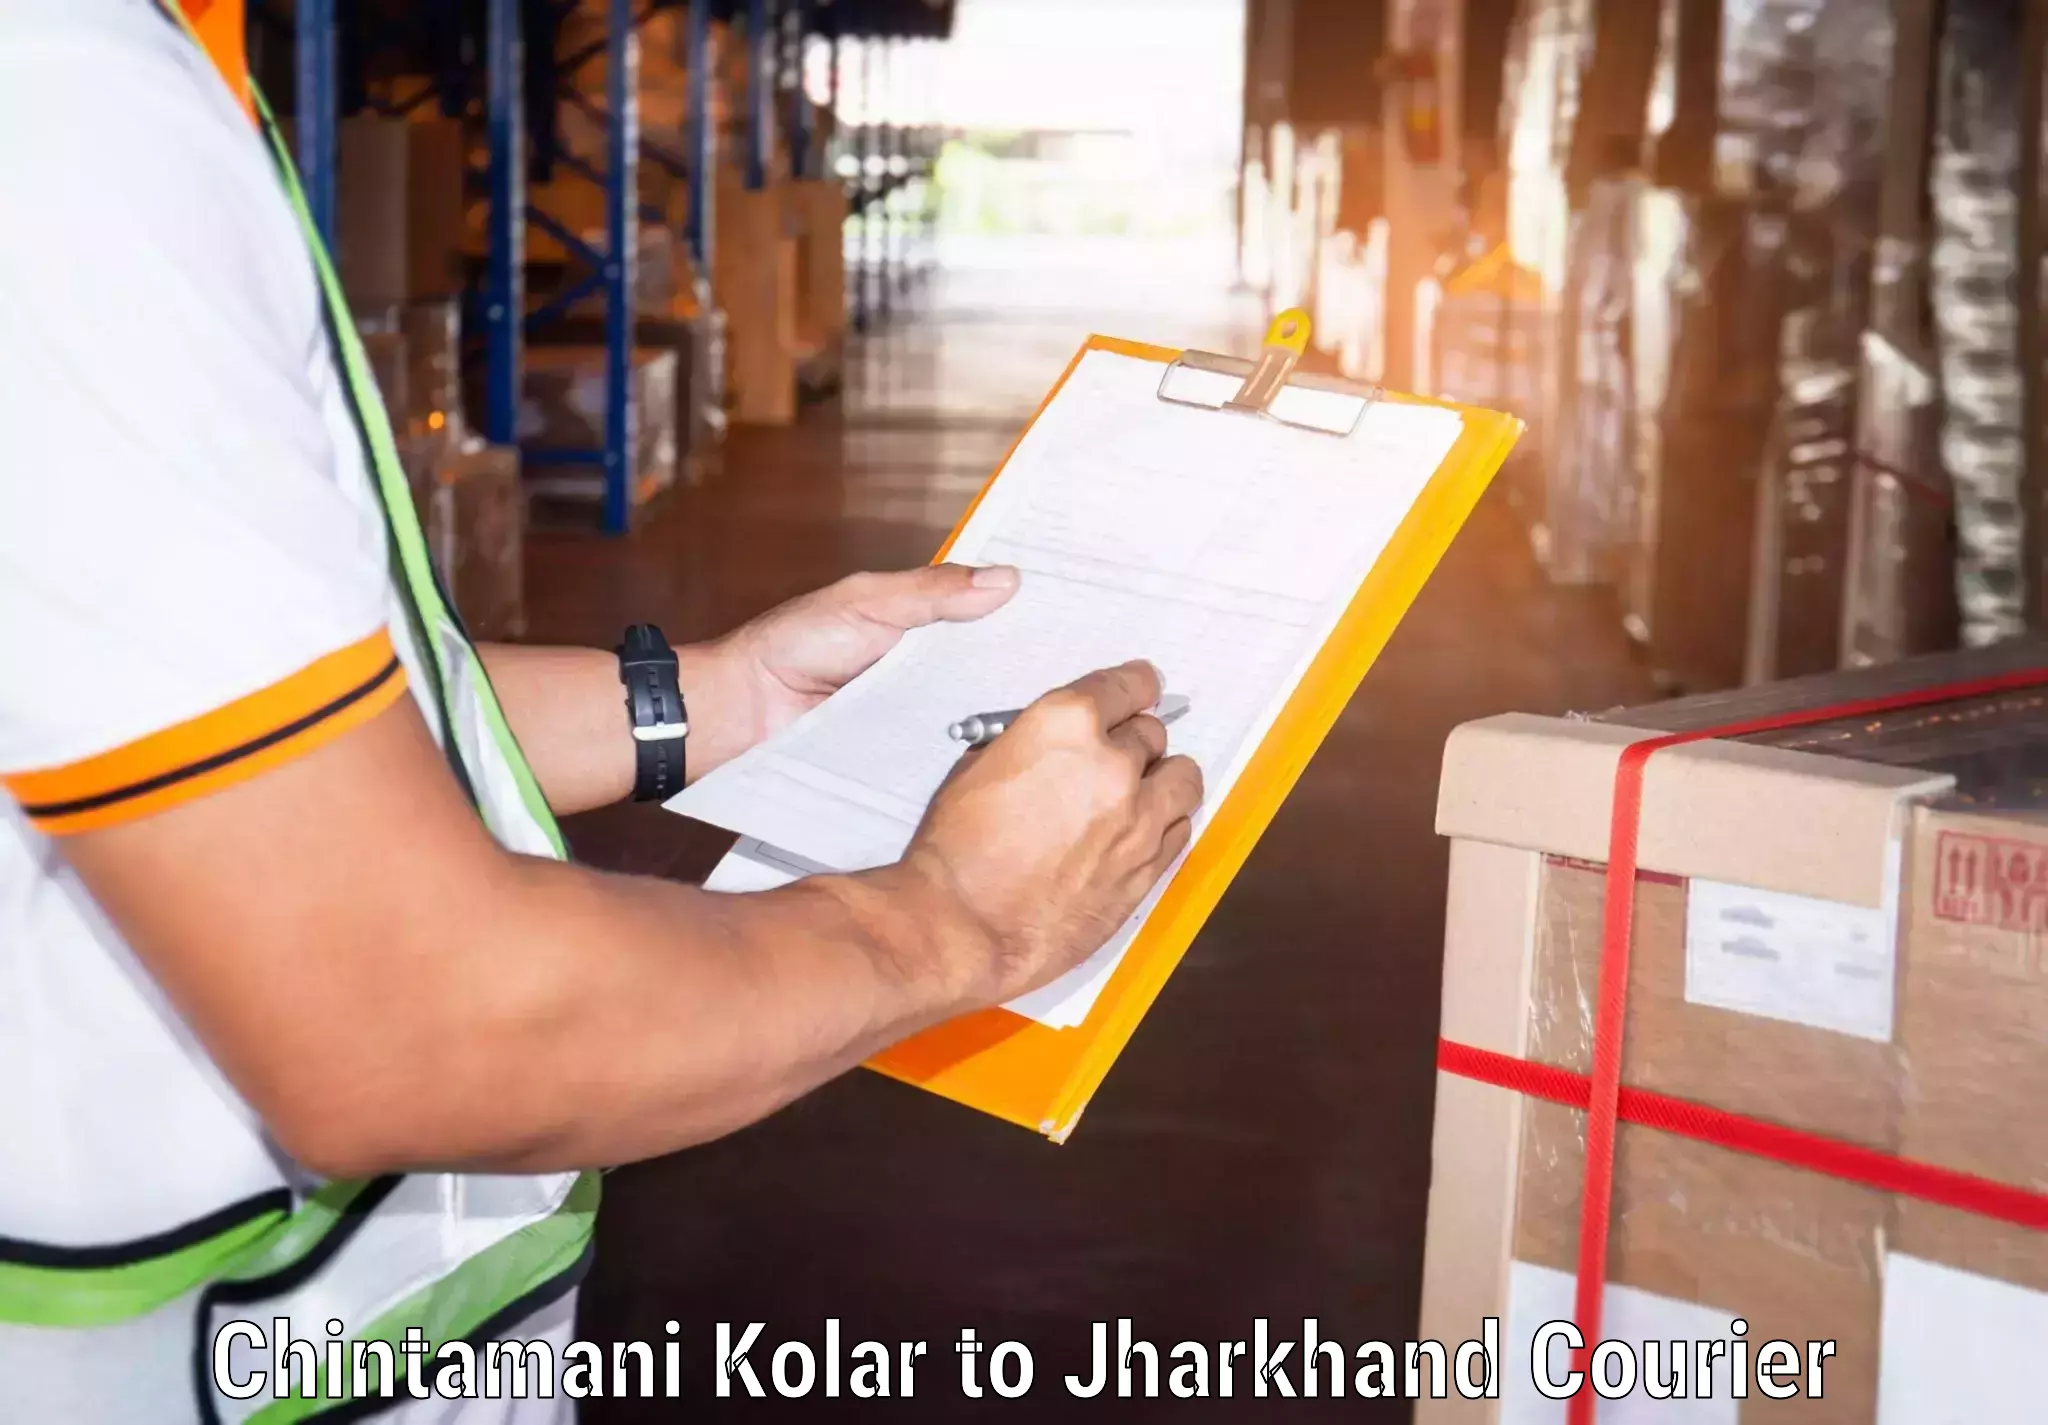 Easy access courier services Chintamani Kolar to Dhanbad